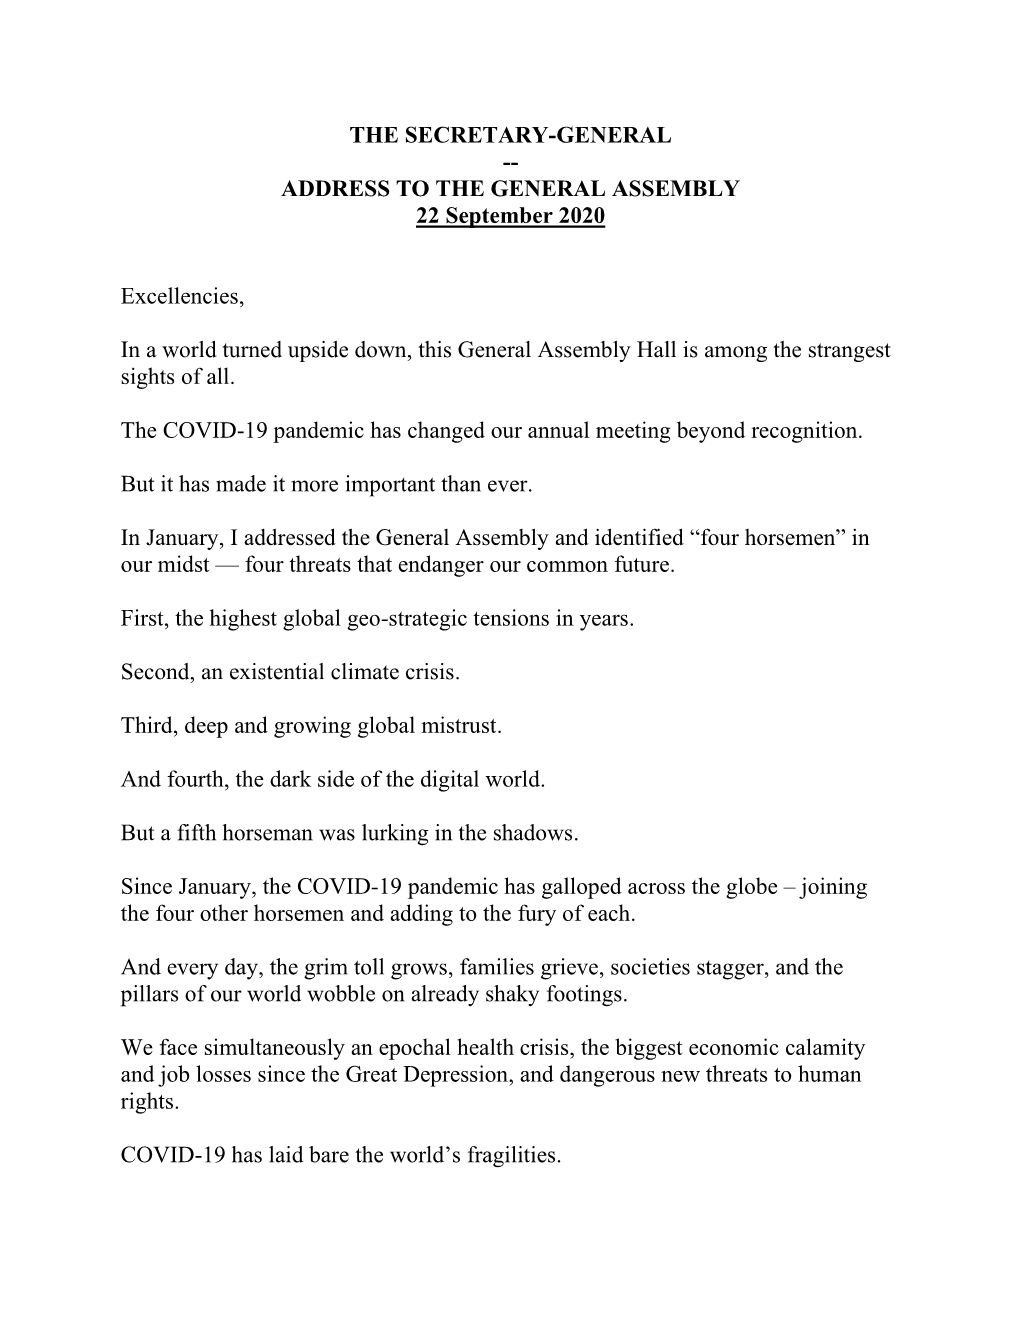 ADDRESS to the GENERAL ASSEMBLY 22 September 2020